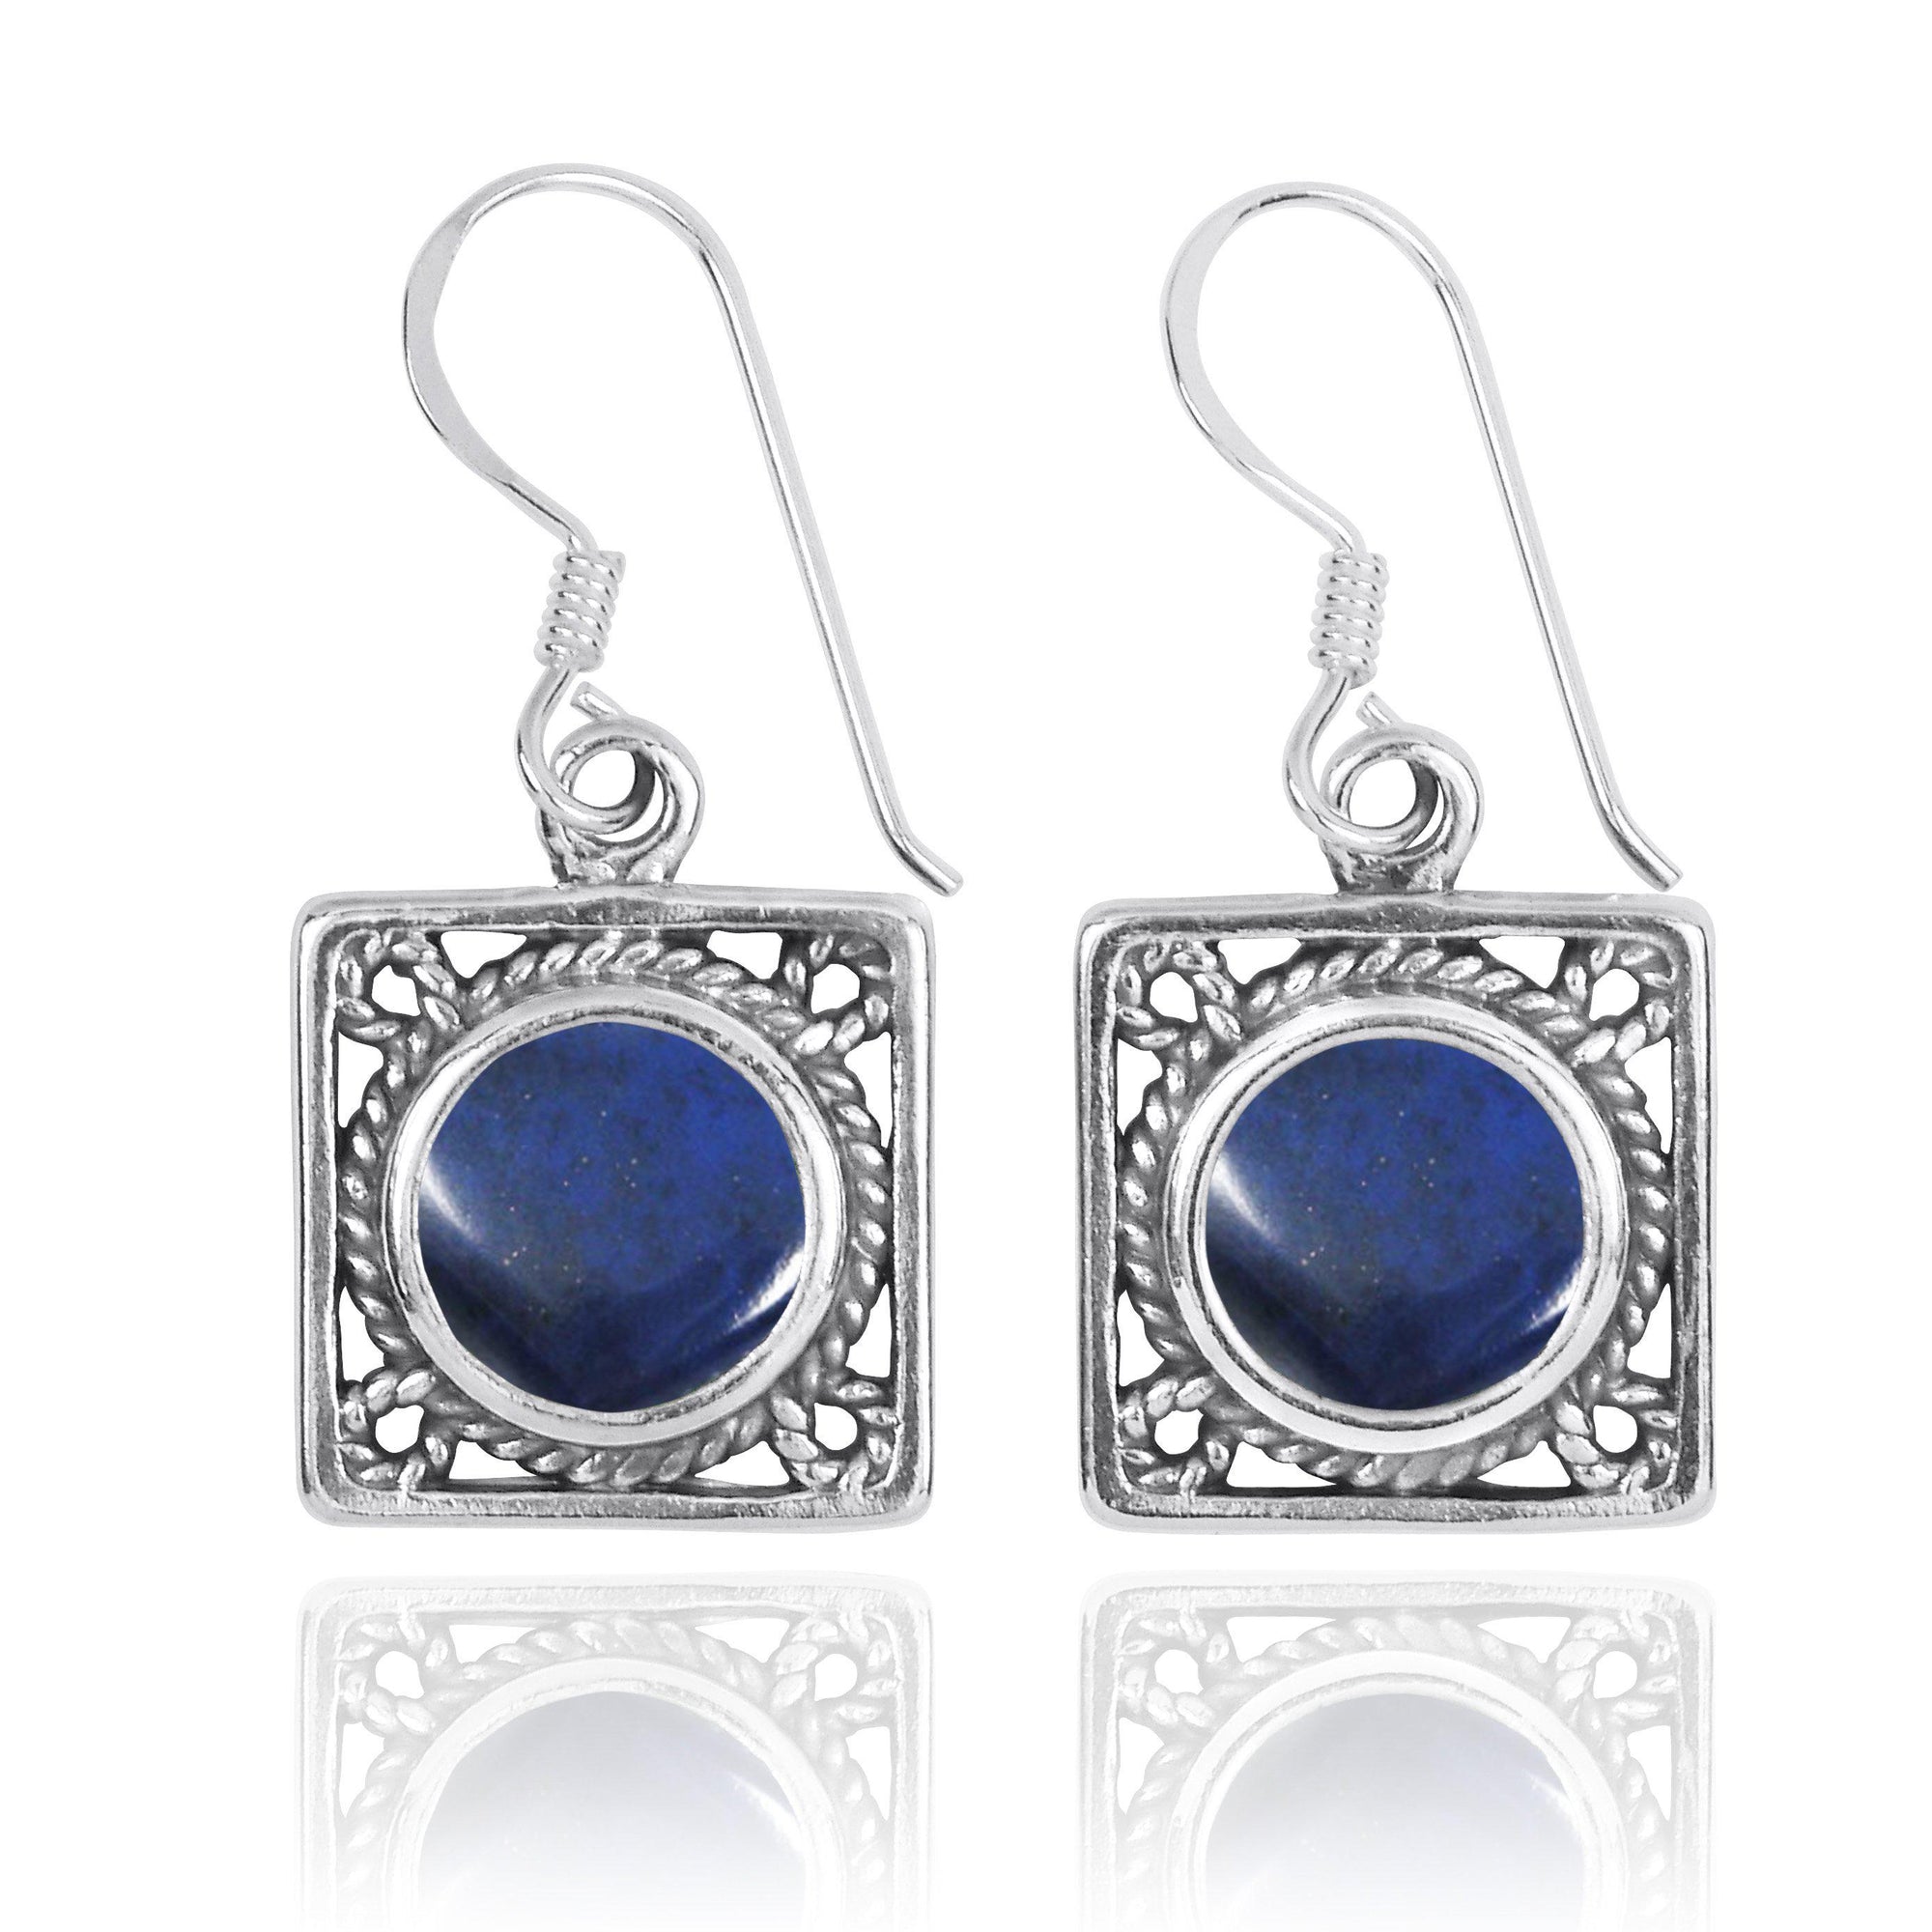 Sterling Silver Square French Wire Earrings with Round Lapis